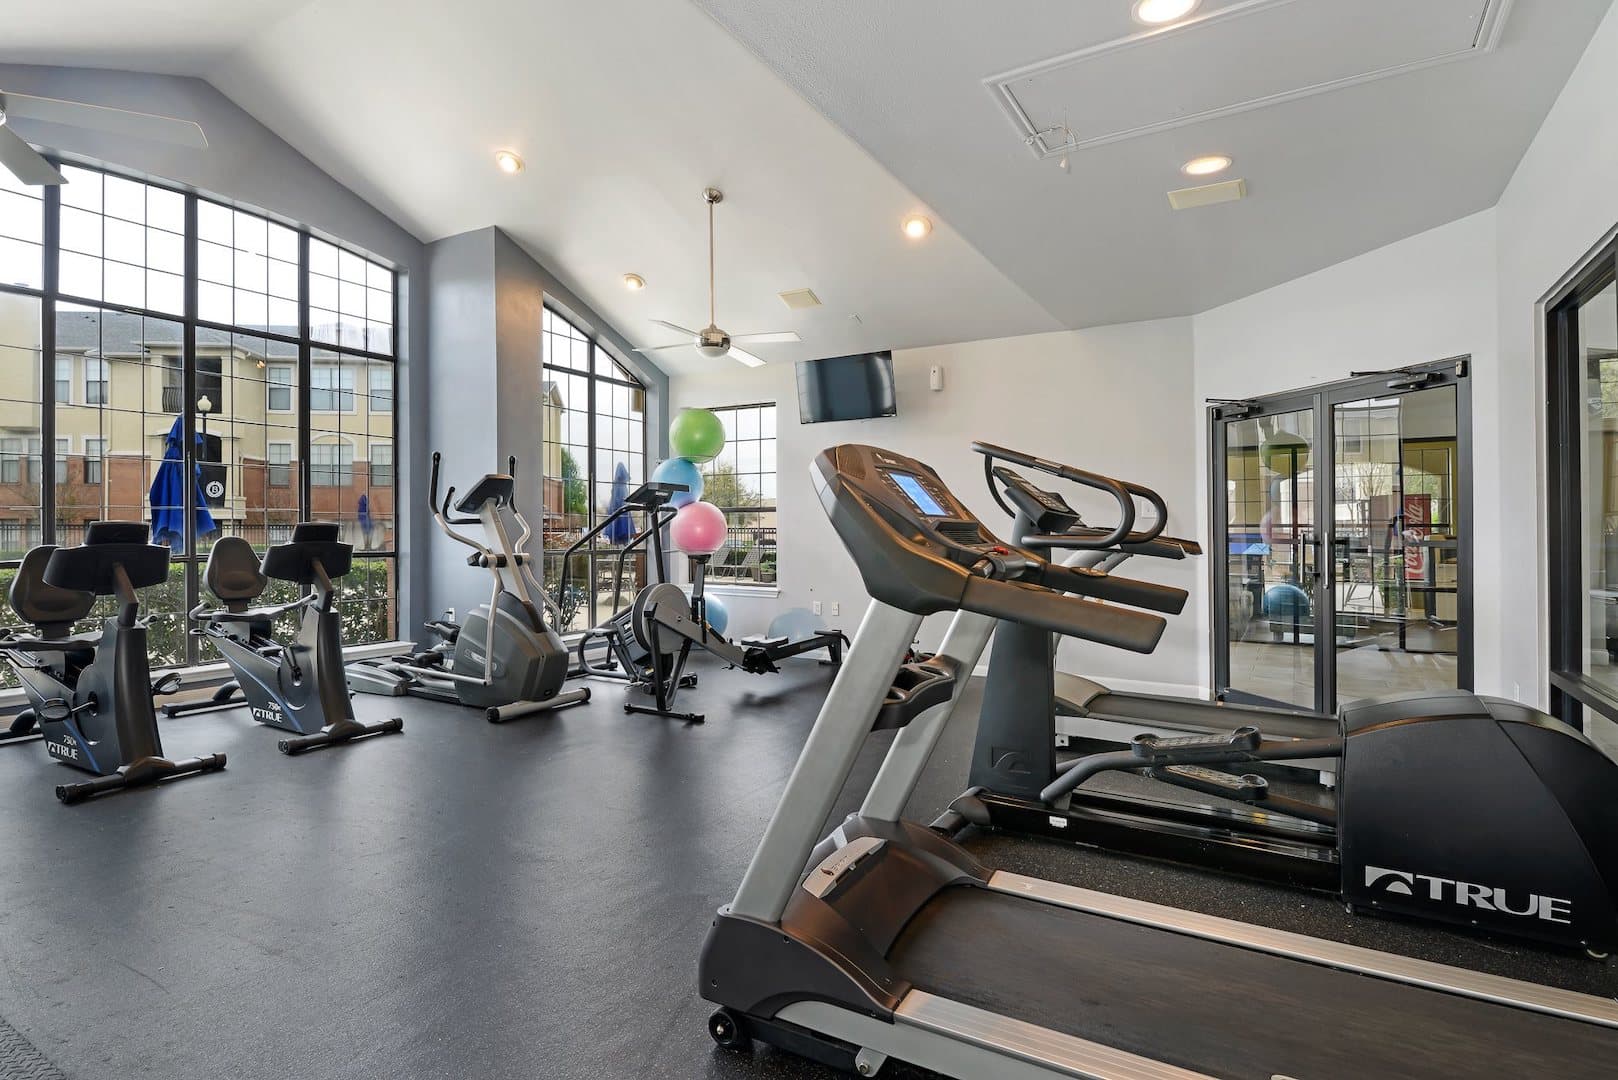 exercise anytime in the fitness center with modern equipment